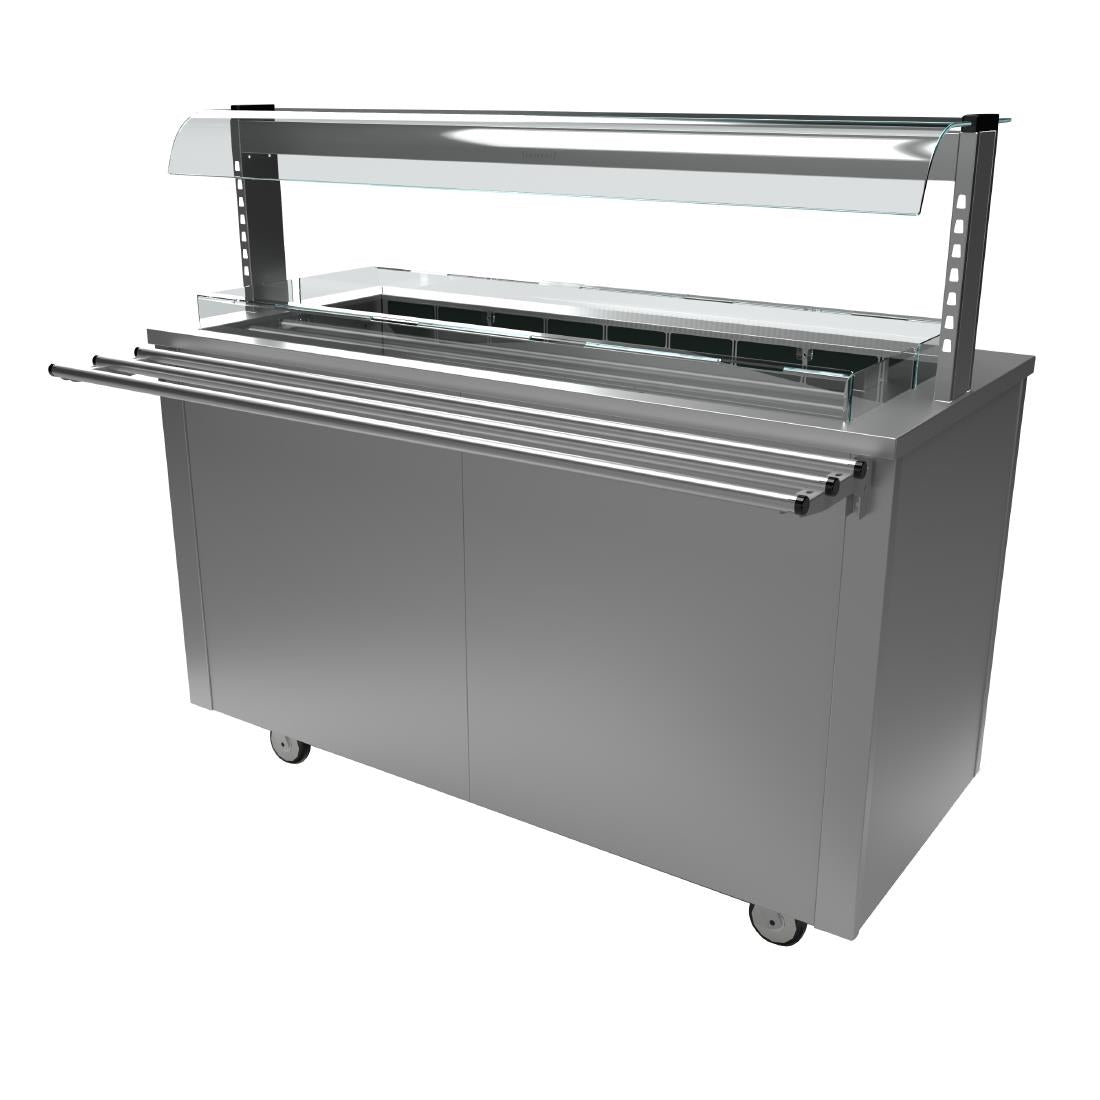 DR412 Moffat Versicarte Plus Cold Food Service Counter VCRW4 JD Catering Equipment Solutions Ltd